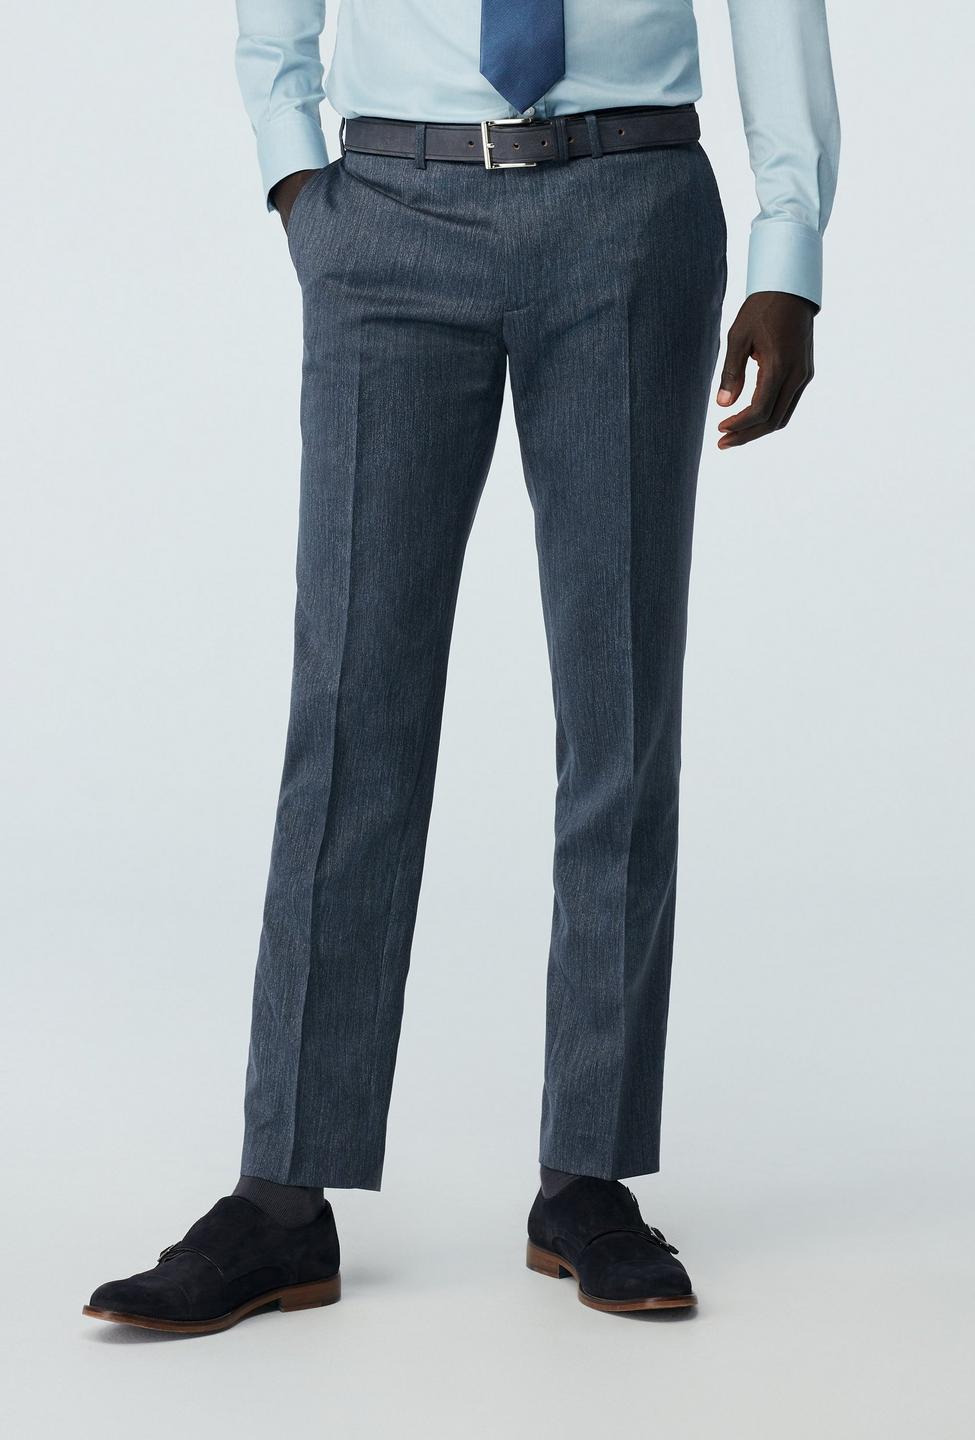 Blue pants - Solid Design from Indochino Collection